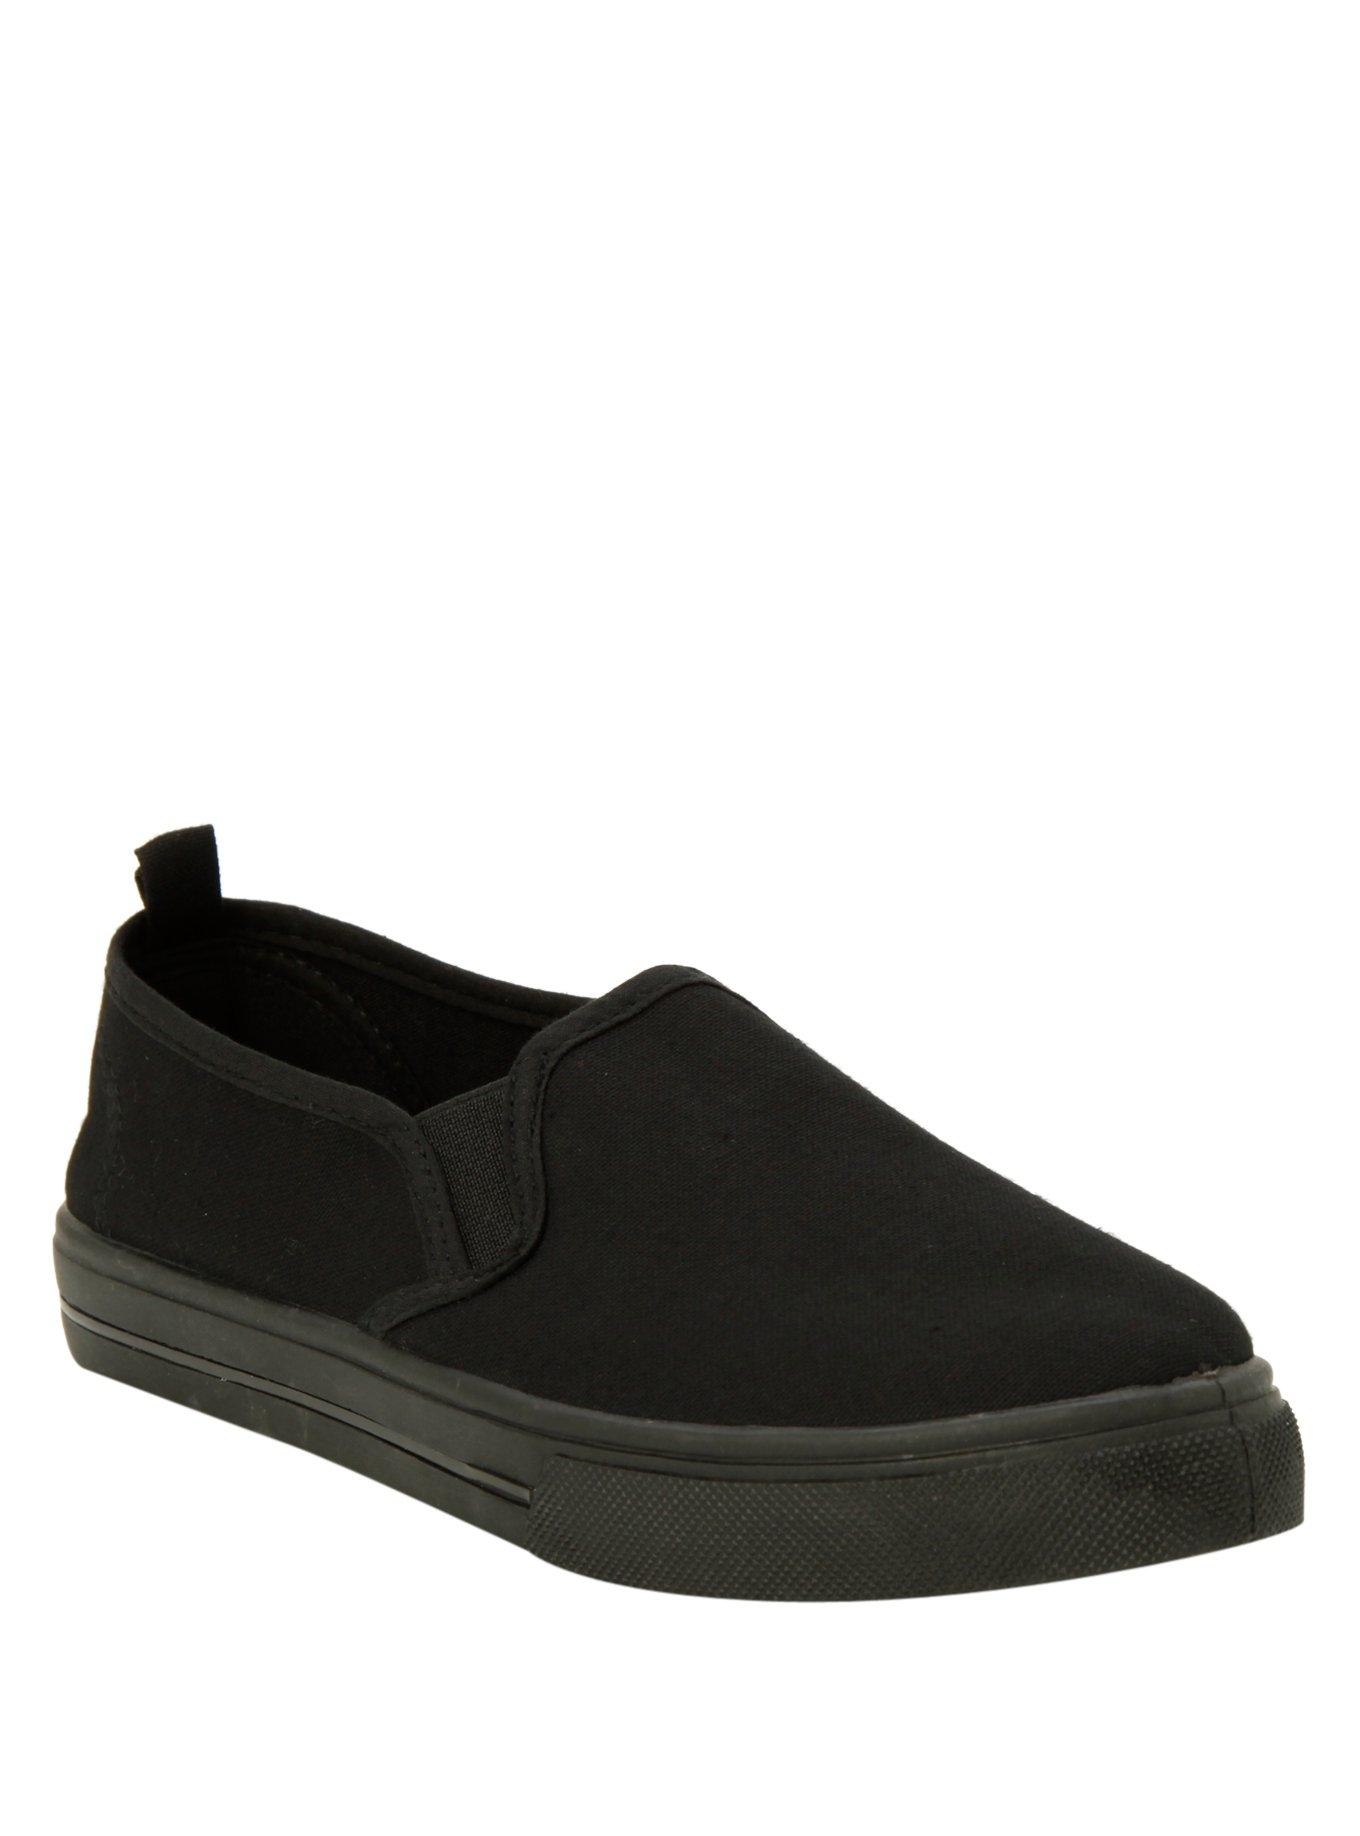 Solid Black Slip-On Shoes | Hot Topic